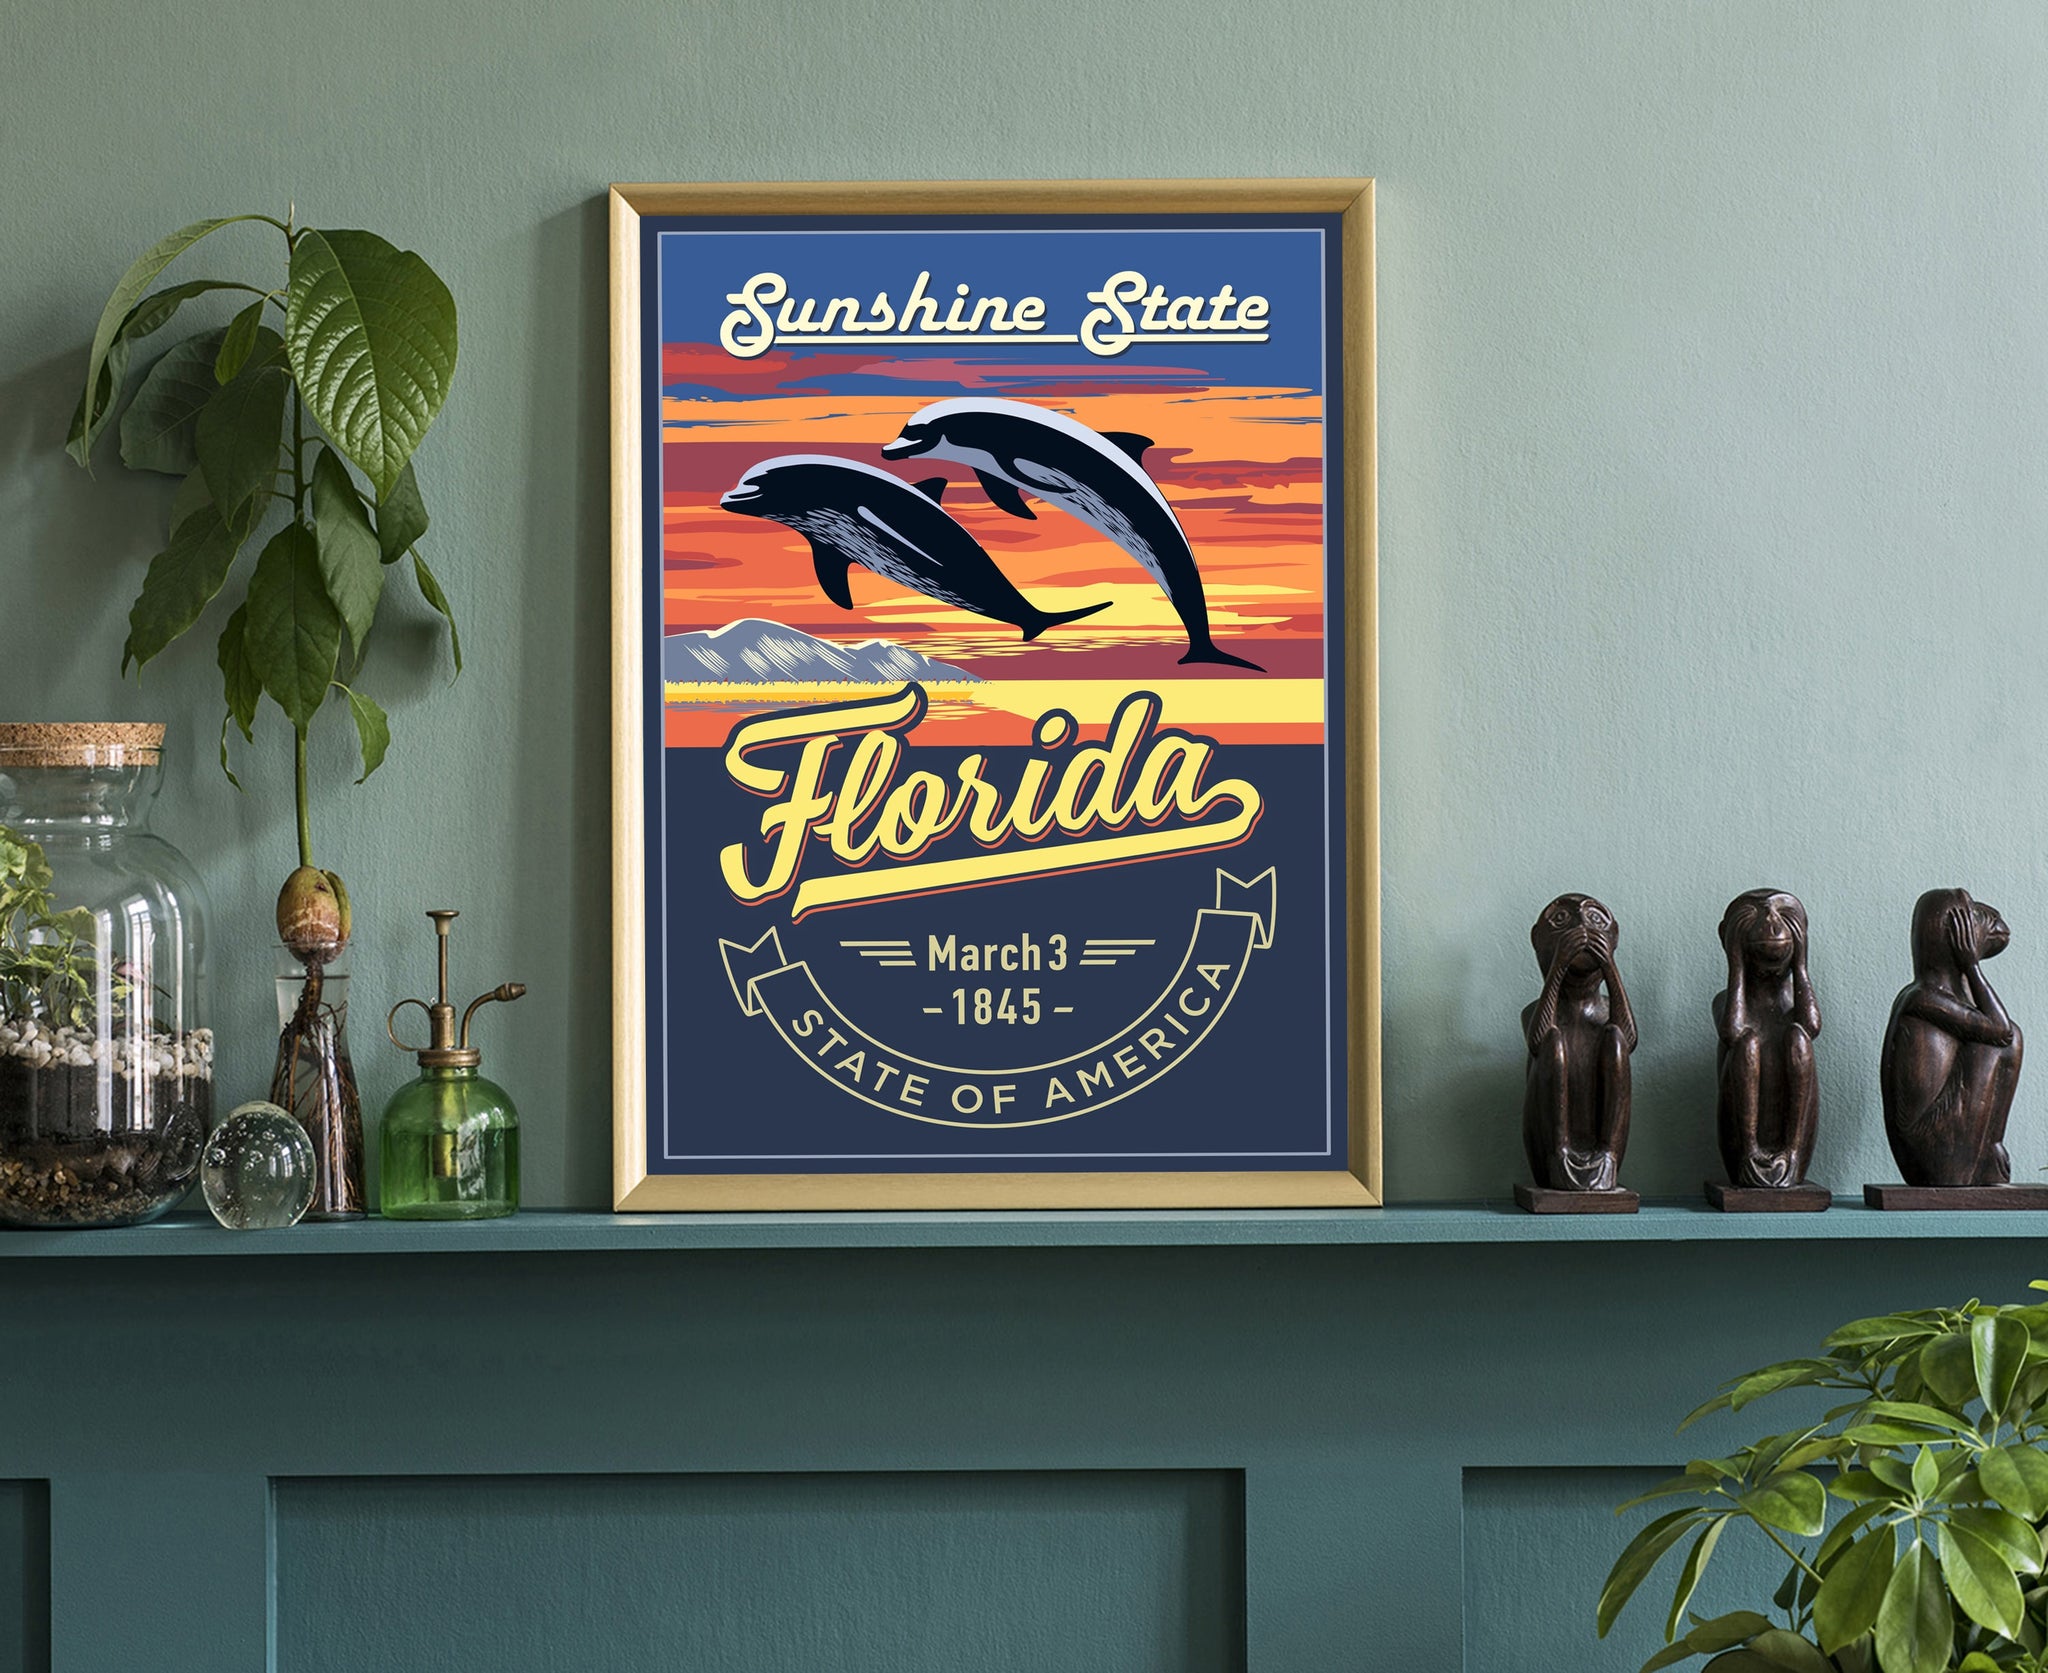 United States Florida State Poster, Florida Poster Print, Florida State Emblem Poster, Retro Travel State Poster, Home and Office Wall Art